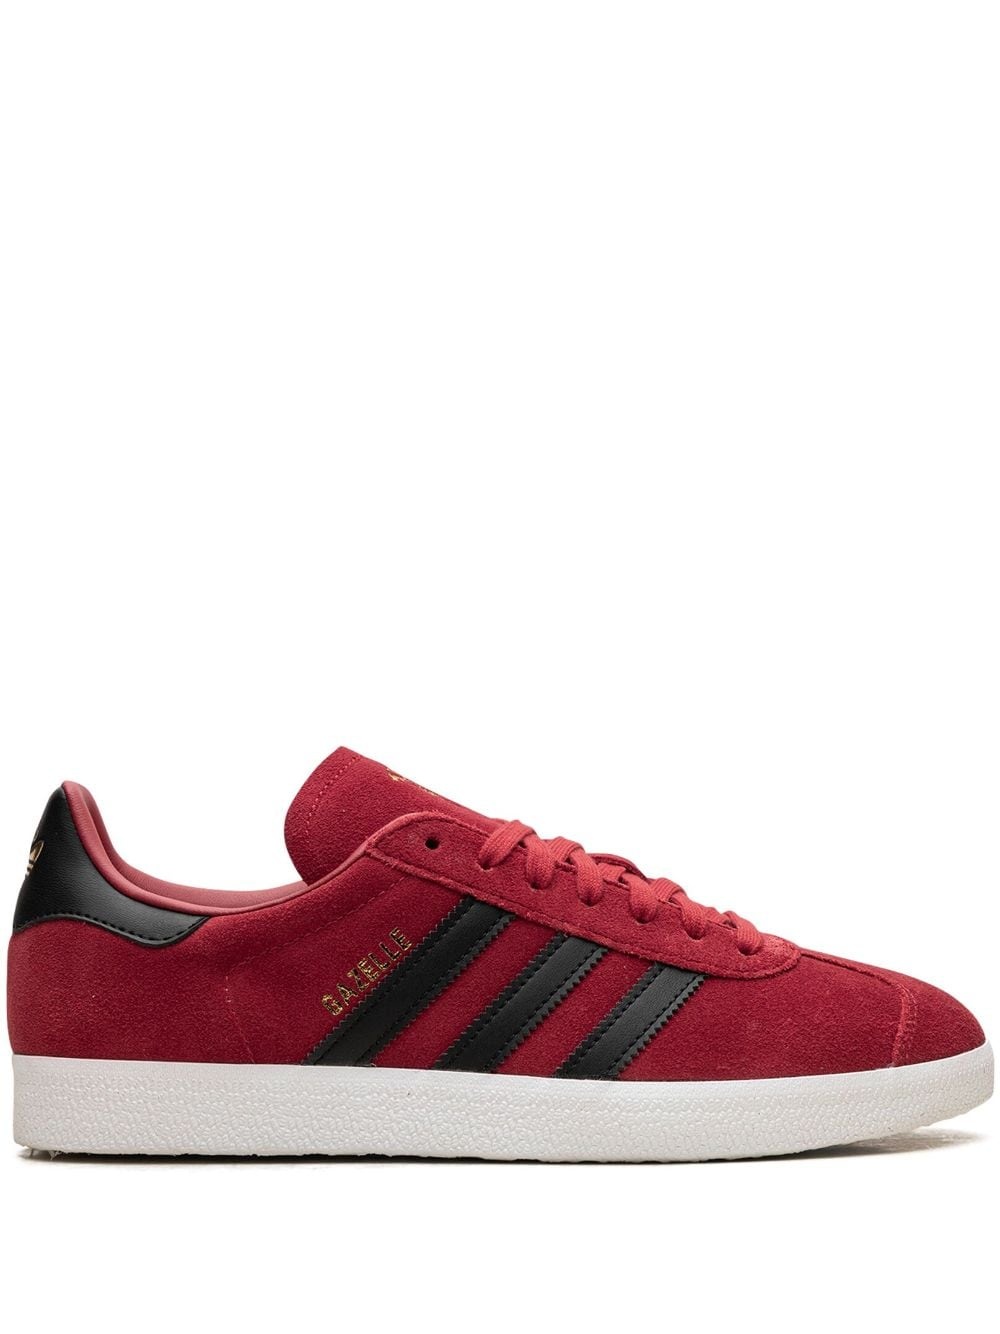 Gazelle "Manchester United" sneakers - 1